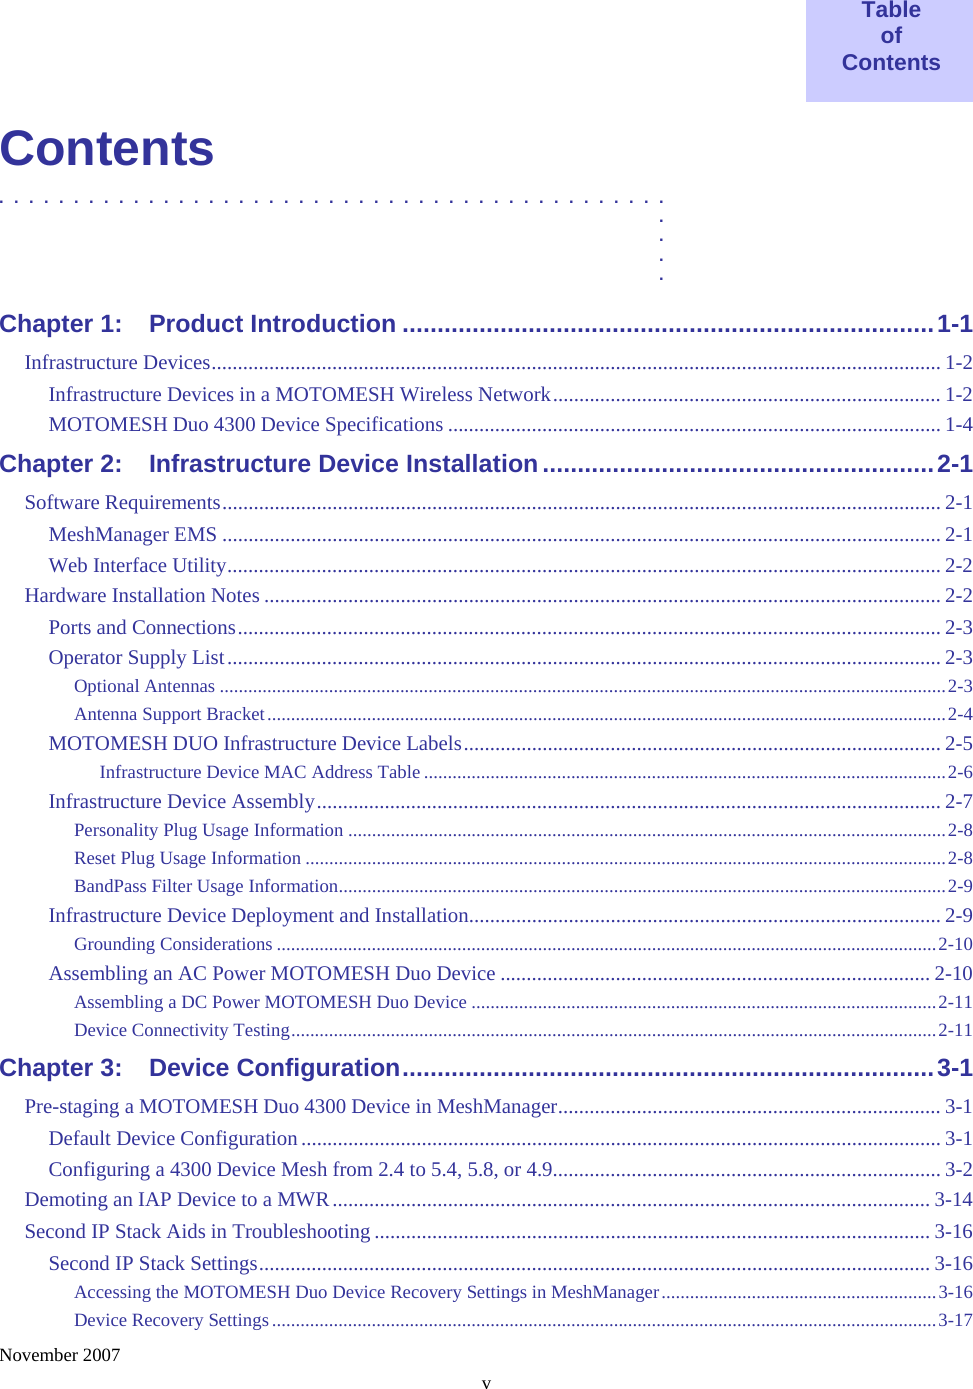    November 2007 v  Table of Contents  Contents .............................................  .  .  .  . Chapter 1: Product Introduction ............................................................................1-1 Infrastructure Devices........................................................................................................................................... 1-2 Infrastructure Devices in a MOTOMESH Wireless Network.......................................................................... 1-2 MOTOMESH Duo 4300 Device Specifications .............................................................................................. 1-4 Chapter 2: Infrastructure Device Installation........................................................2-1 Software Requirements......................................................................................................................................... 2-1 MeshManager EMS ......................................................................................................................................... 2-1 Web Interface Utility........................................................................................................................................ 2-2 Hardware Installation Notes ................................................................................................................................. 2-2 Ports and Connections...................................................................................................................................... 2-3 Operator Supply List........................................................................................................................................ 2-3 Optional Antennas .........................................................................................................................................................2-3 Antenna Support Bracket...............................................................................................................................................2-4 MOTOMESH DUO Infrastructure Device Labels........................................................................................... 2-5 Infrastructure Device MAC Address Table ..............................................................................................................2-6 Infrastructure Device Assembly....................................................................................................................... 2-7 Personality Plug Usage Information ..............................................................................................................................2-8 Reset Plug Usage Information .......................................................................................................................................2-8 BandPass Filter Usage Information................................................................................................................................2-9 Infrastructure Device Deployment and Installation.......................................................................................... 2-9 Grounding Considerations ...........................................................................................................................................2-10 Assembling an AC Power MOTOMESH Duo Device .................................................................................. 2-10 Assembling a DC Power MOTOMESH Duo Device ..................................................................................................2-11 Device Connectivity Testing........................................................................................................................................2-11 Chapter 3: Device Configuration............................................................................3-1 Pre-staging a MOTOMESH Duo 4300 Device in MeshManager......................................................................... 3-1 Default Device Configuration.......................................................................................................................... 3-1 Configuring a 4300 Device Mesh from 2.4 to 5.4, 5.8, or 4.9.......................................................................... 3-2 Demoting an IAP Device to a MWR.................................................................................................................. 3-14 Second IP Stack Aids in Troubleshooting .......................................................................................................... 3-16 Second IP Stack Settings................................................................................................................................ 3-16 Accessing the MOTOMESH Duo Device Recovery Settings in MeshManager..........................................................3-16 Device Recovery Settings............................................................................................................................................3-17 